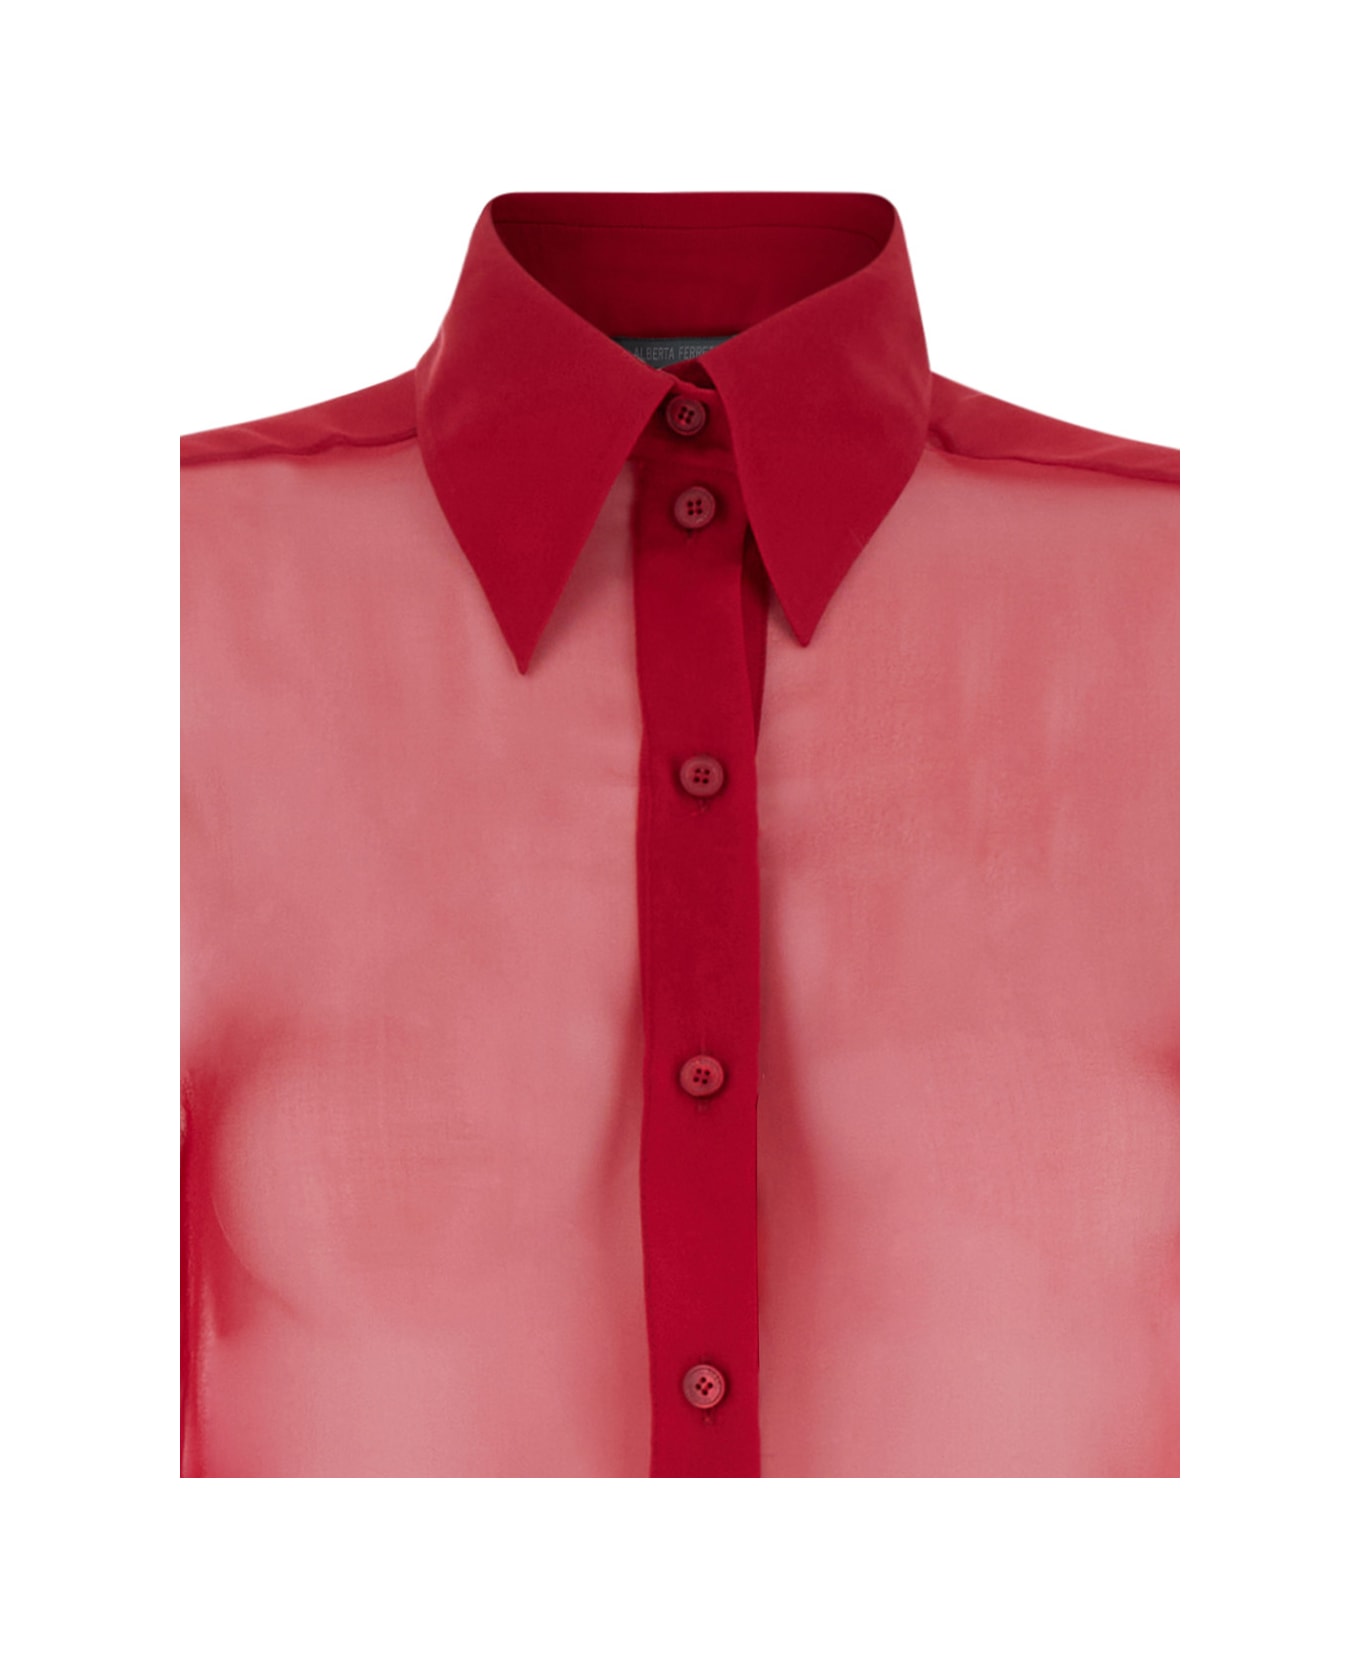 Alberta Ferretti Red Shirt With Pointed Collar In Chiffon Woman - Red シャツ